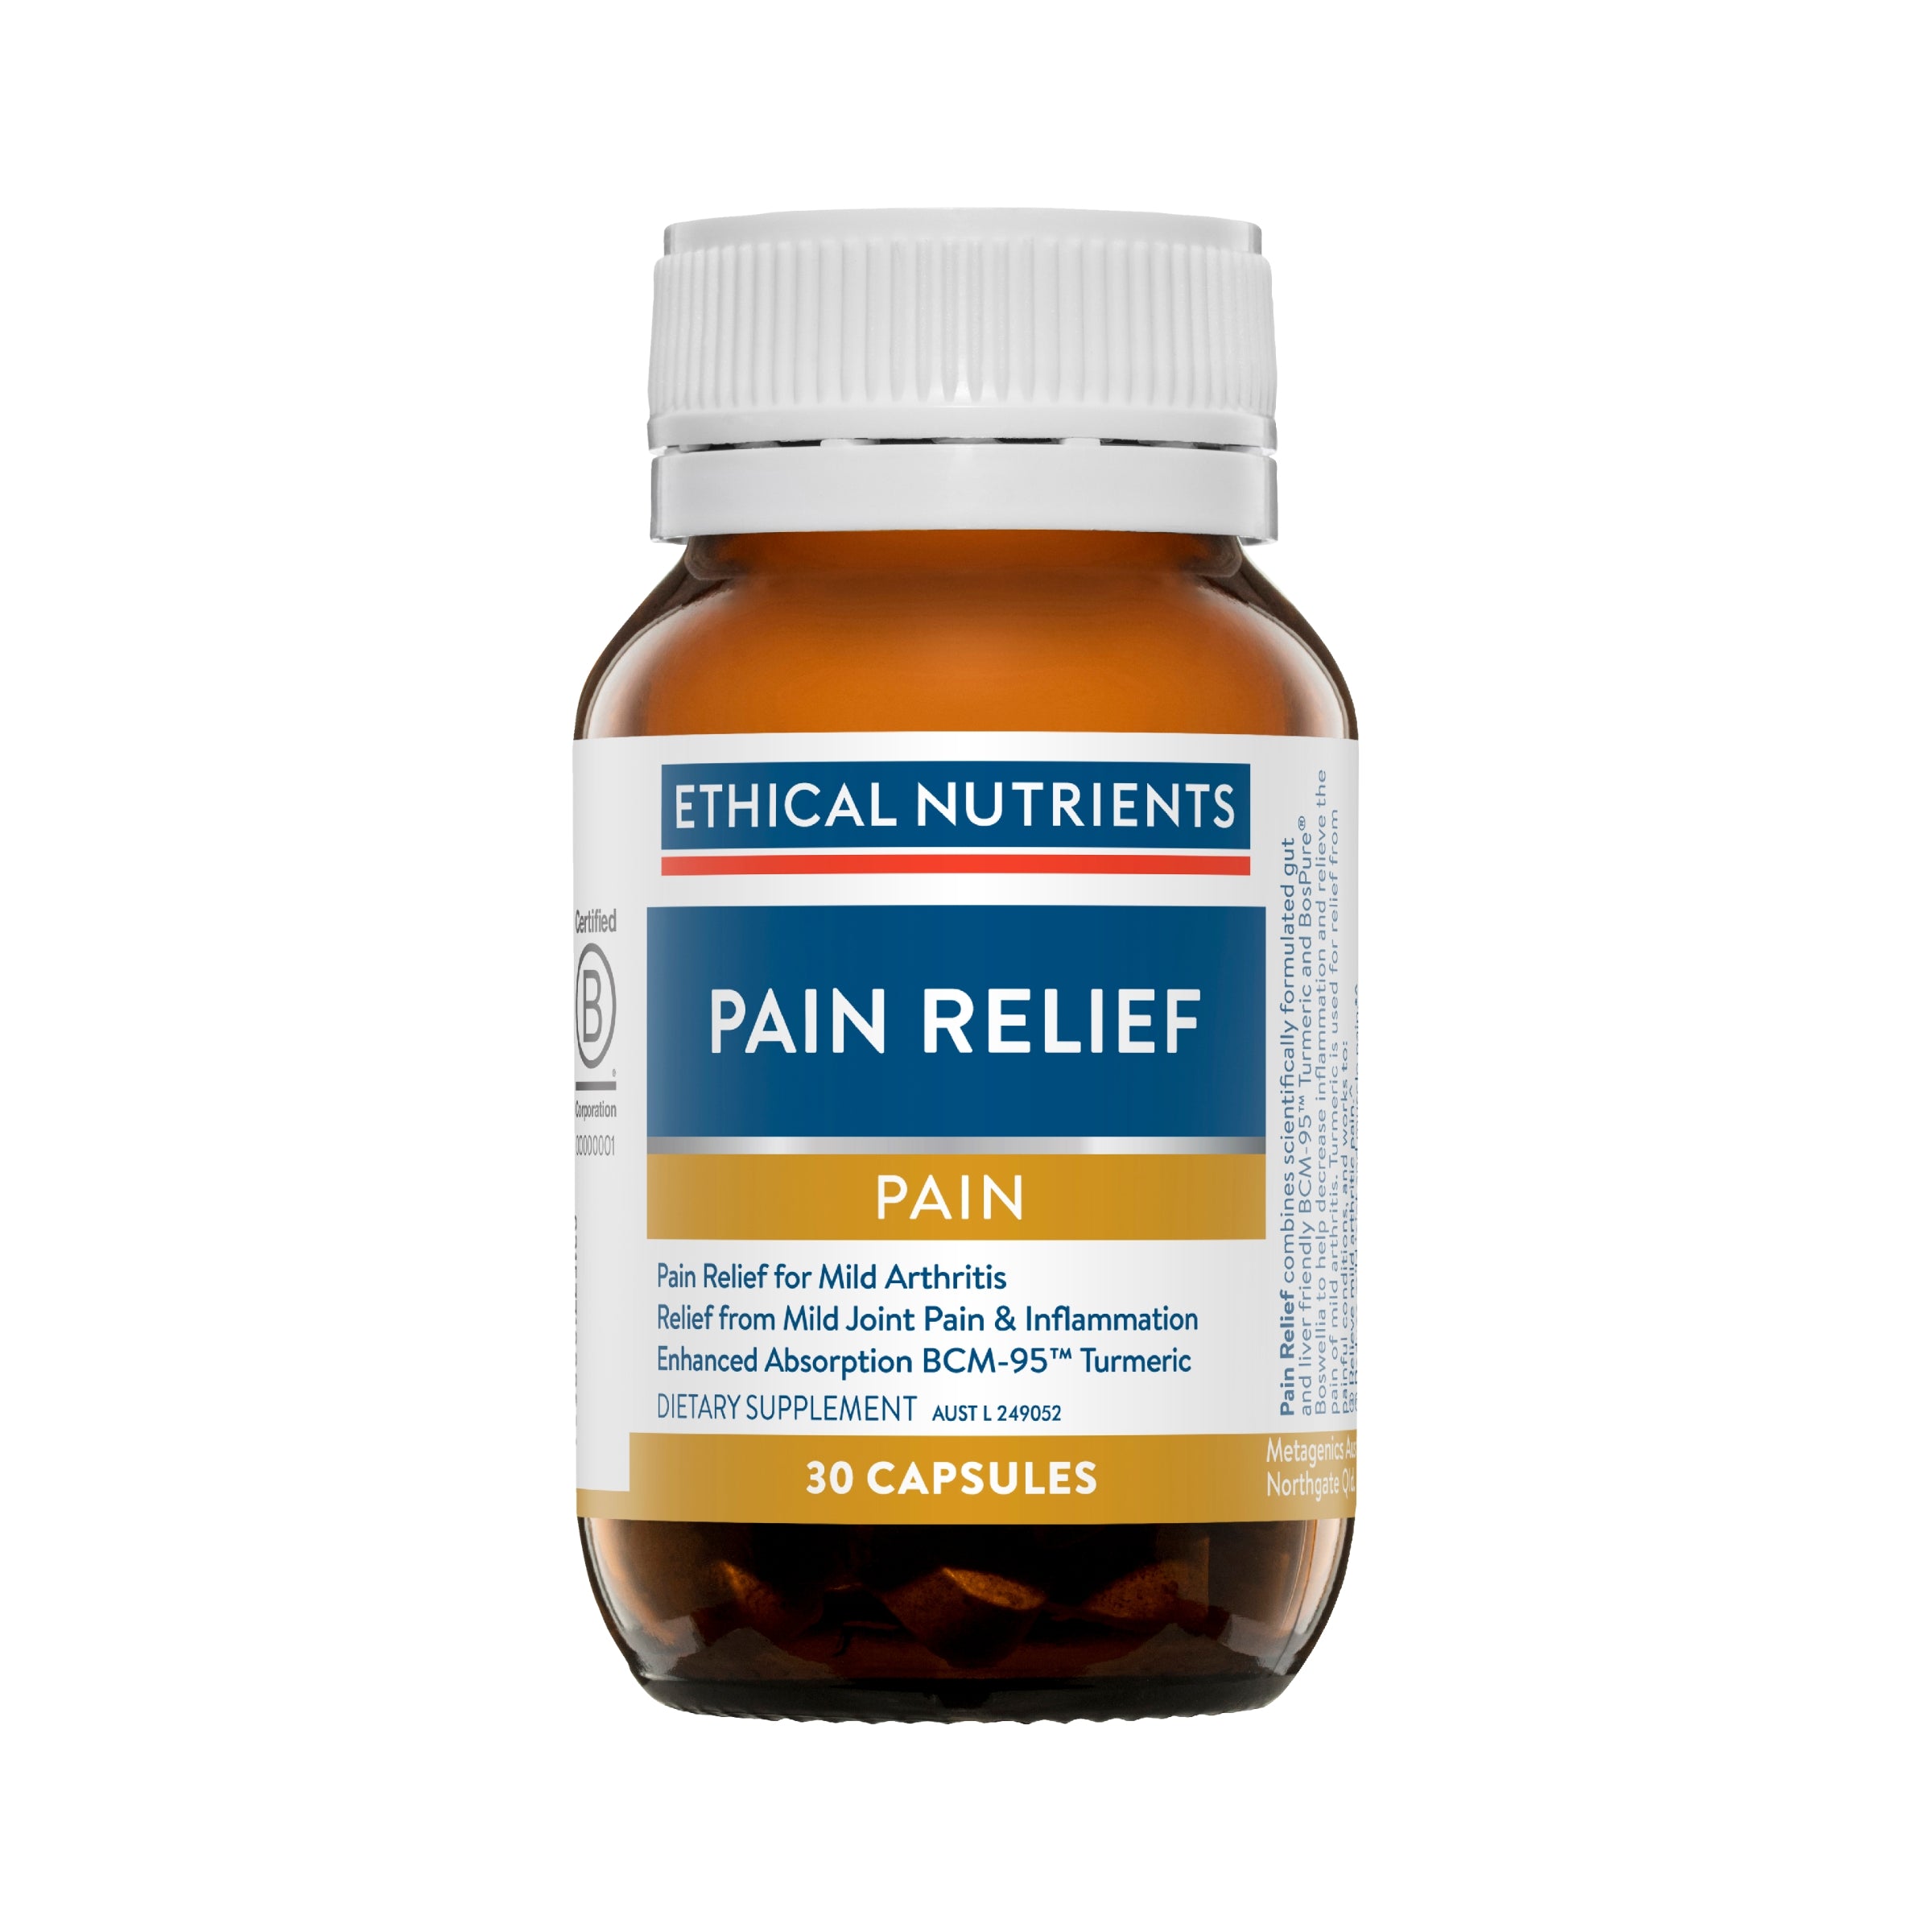 Ethical Nutrients Pain Relief 30 Capsules #size_30 capsules